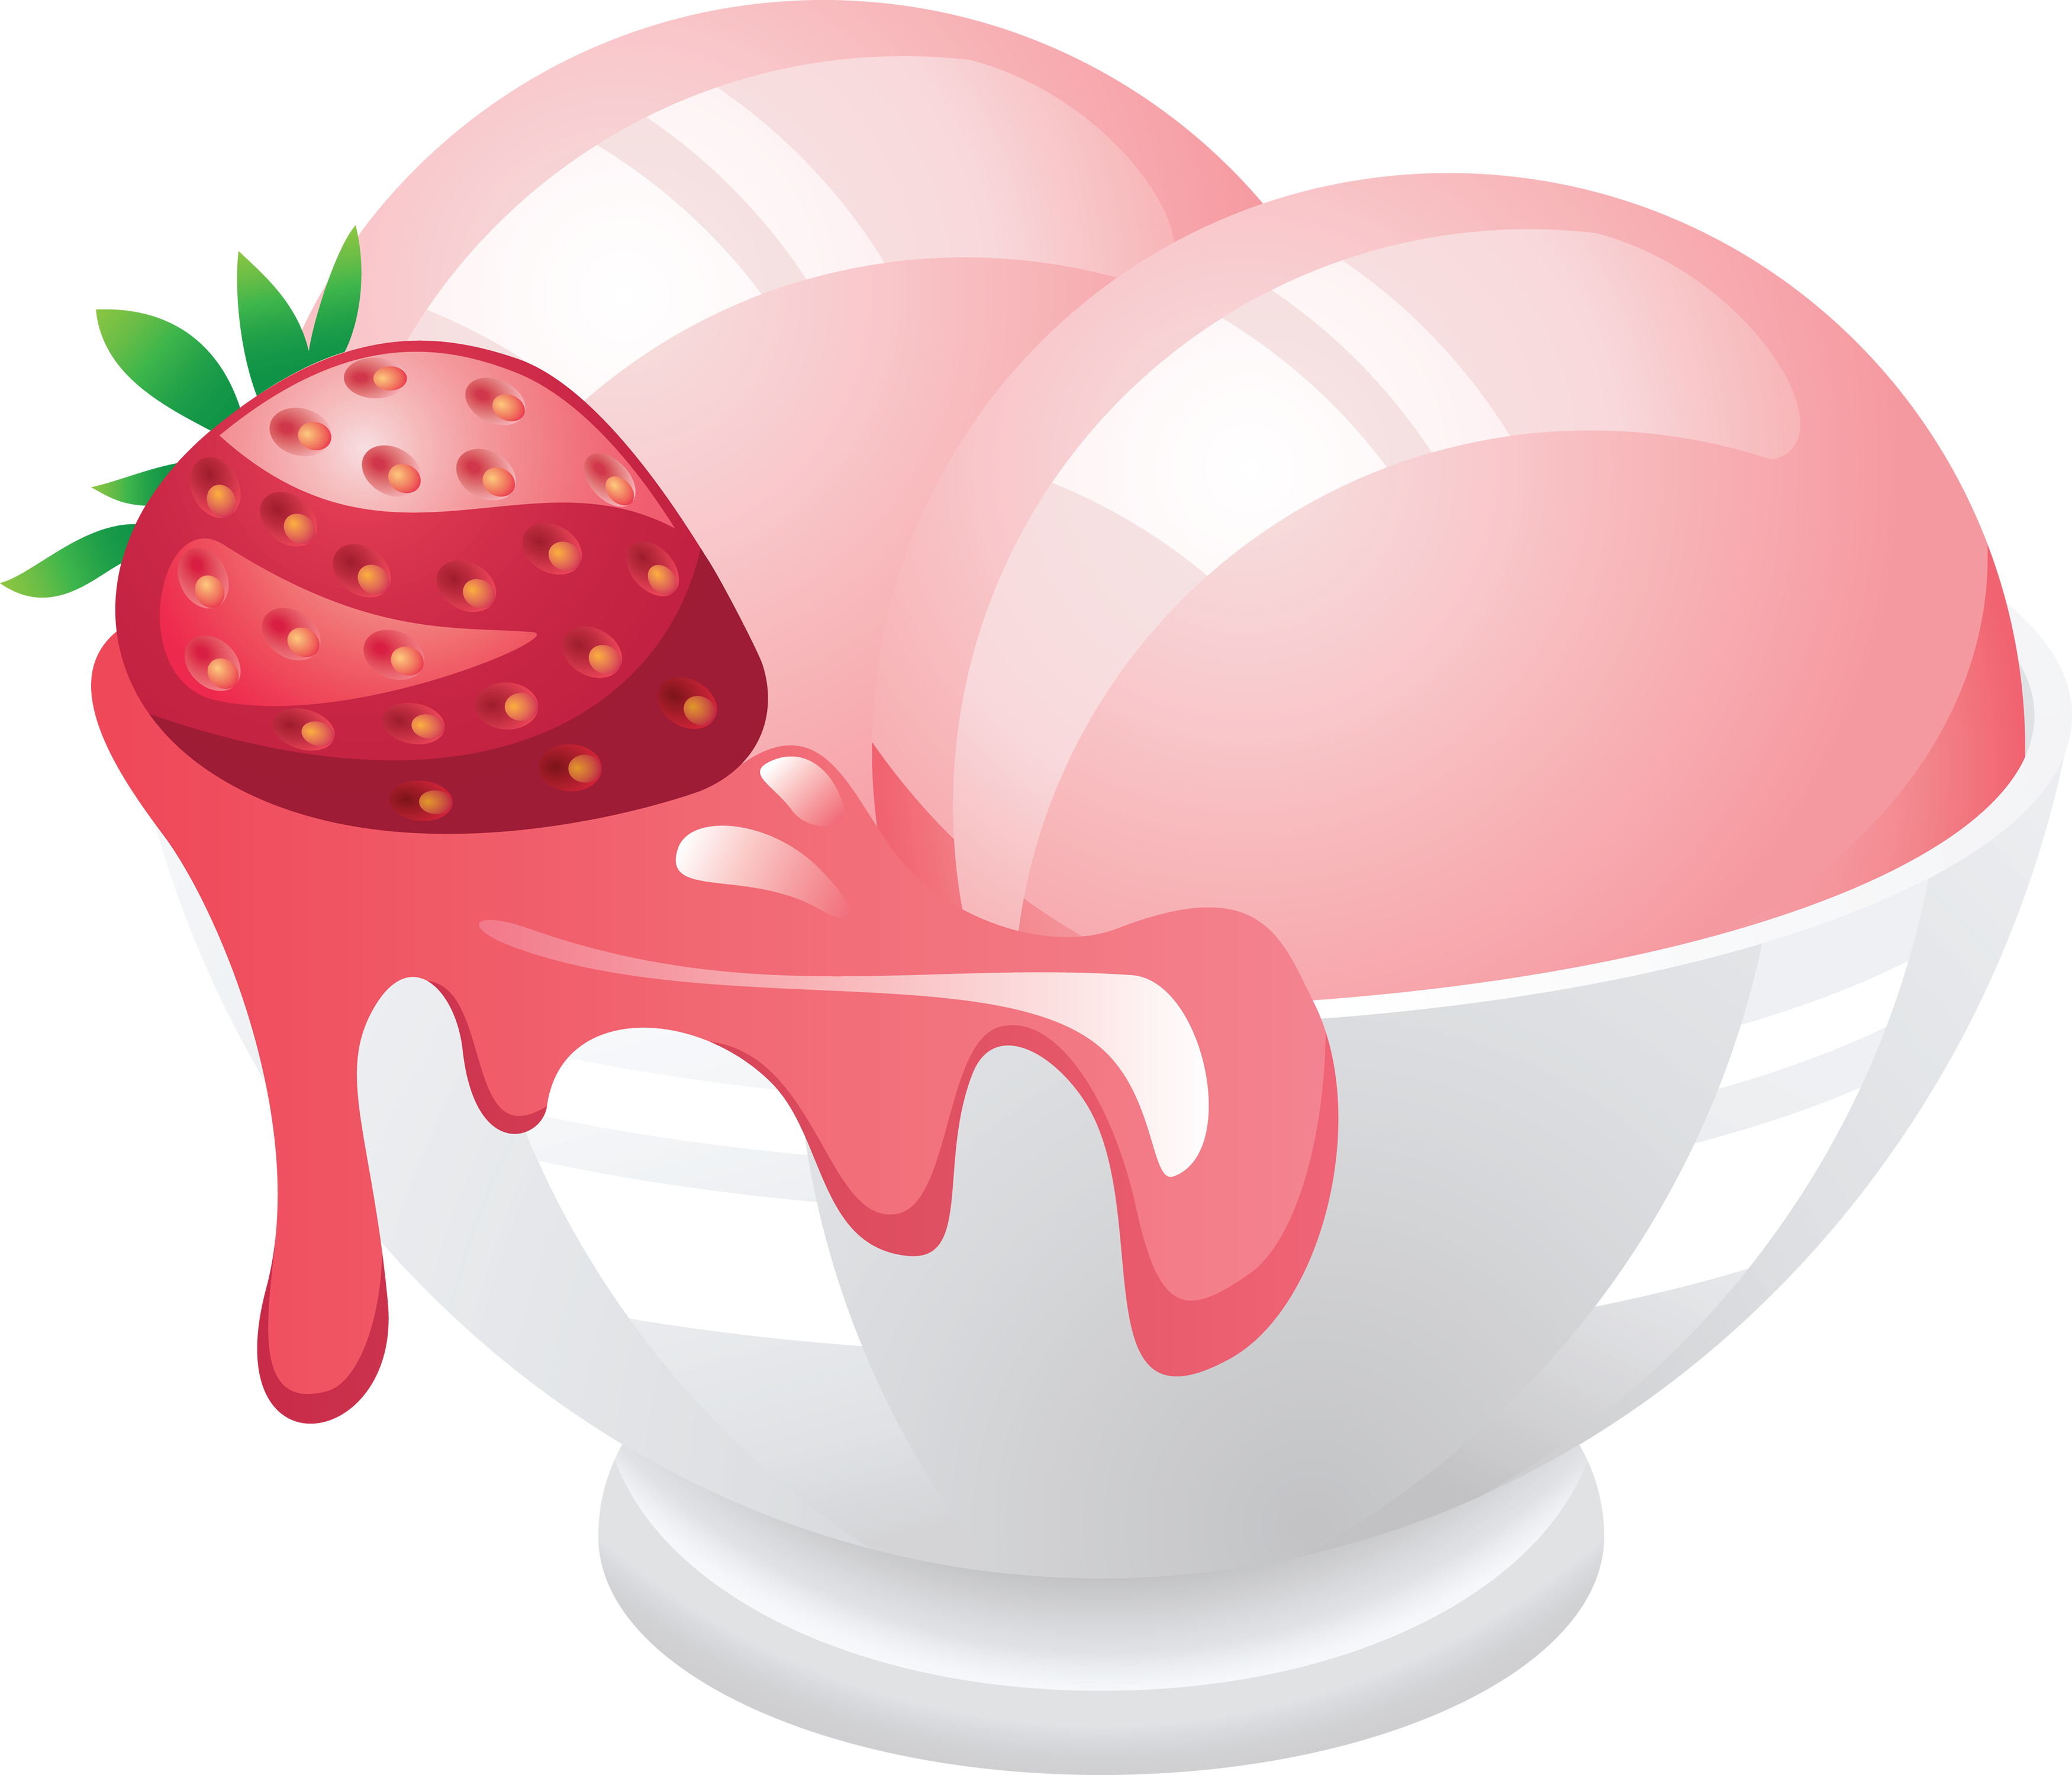 ice clipart strawberry